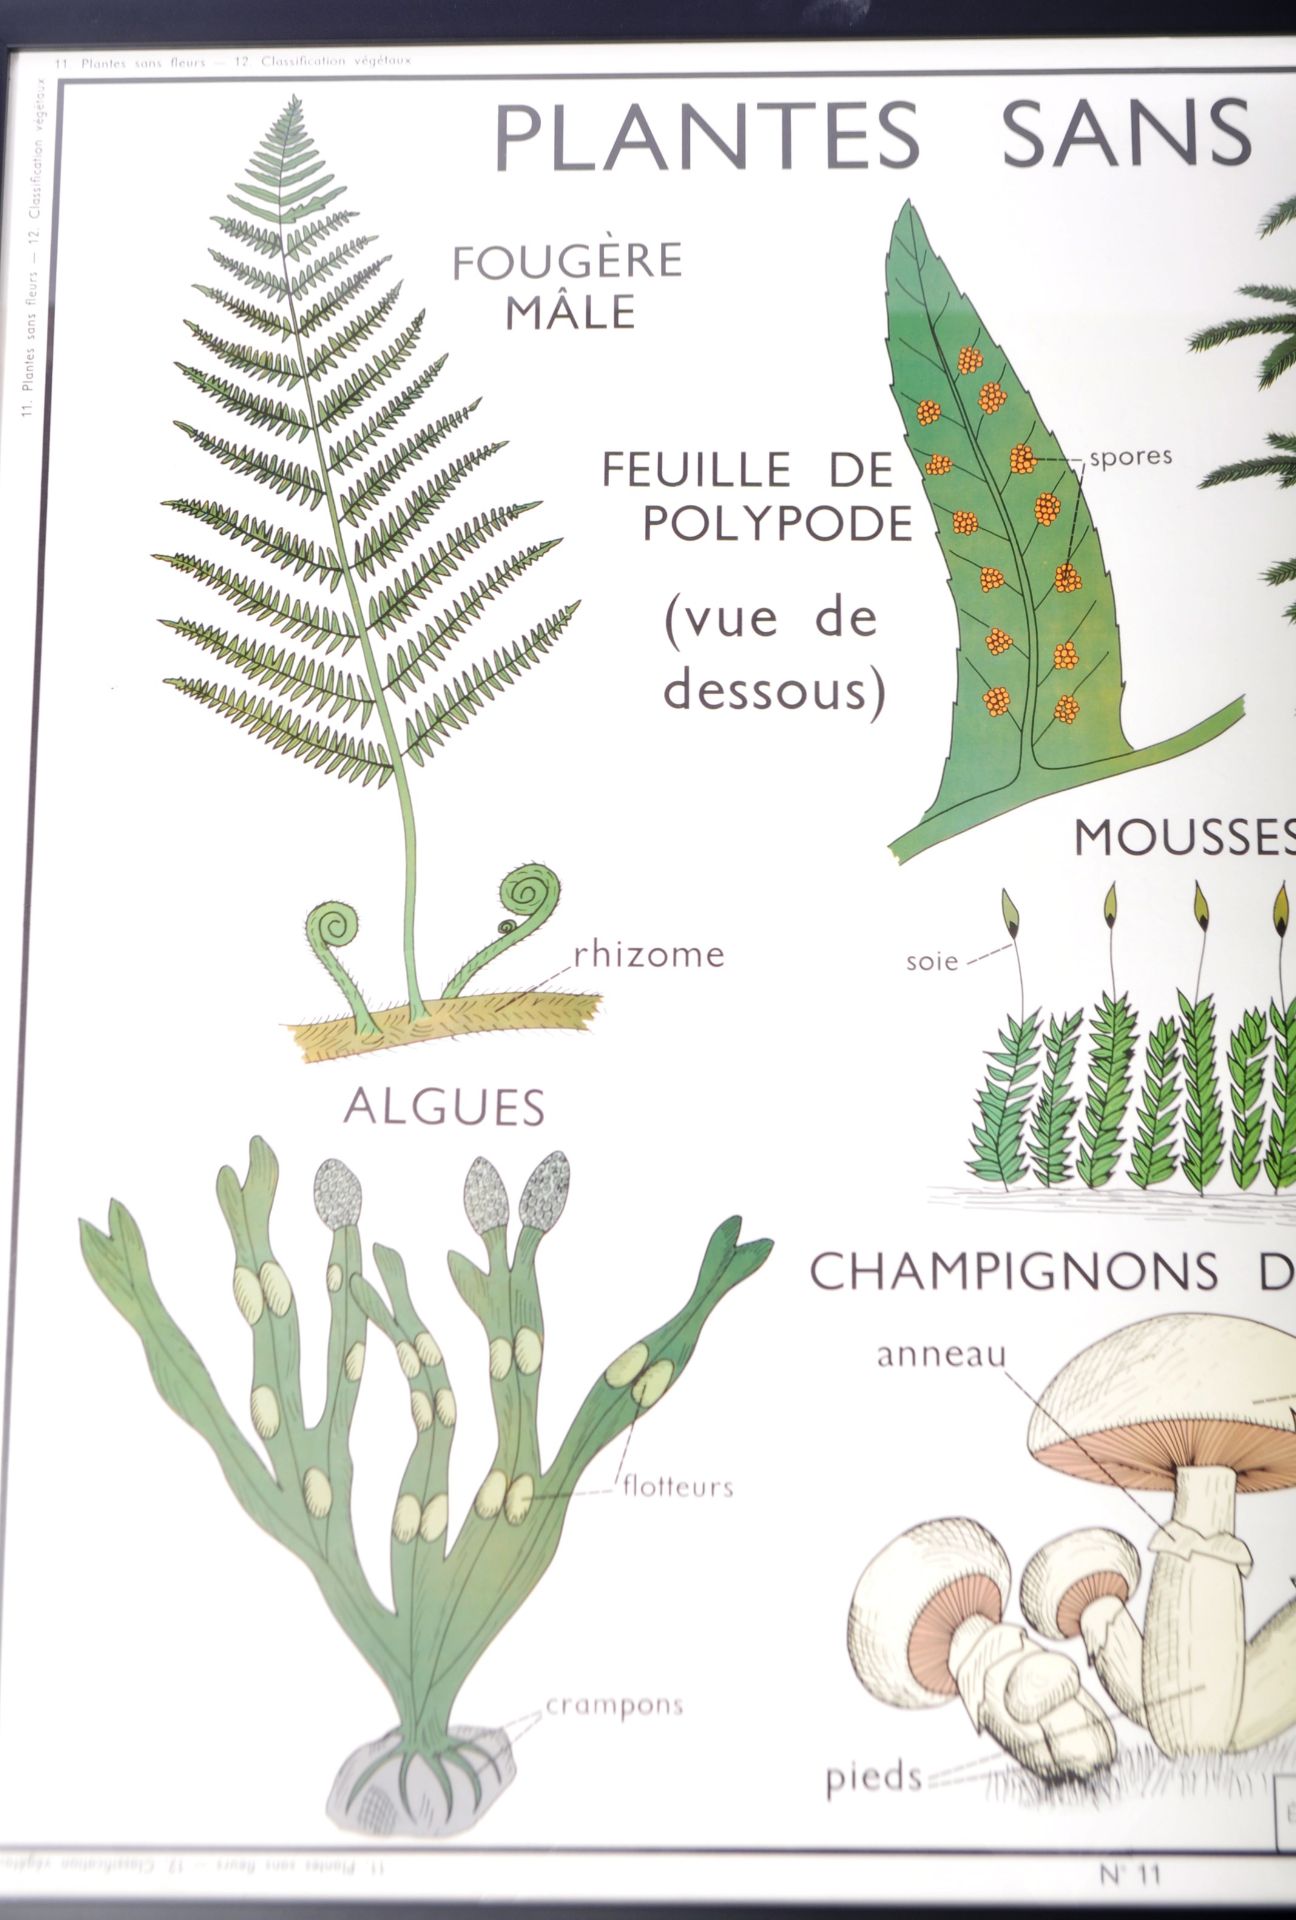 VINTAGE FRENCH FLOWERLESS PLANTS SCHOOL POSTER - Image 3 of 4